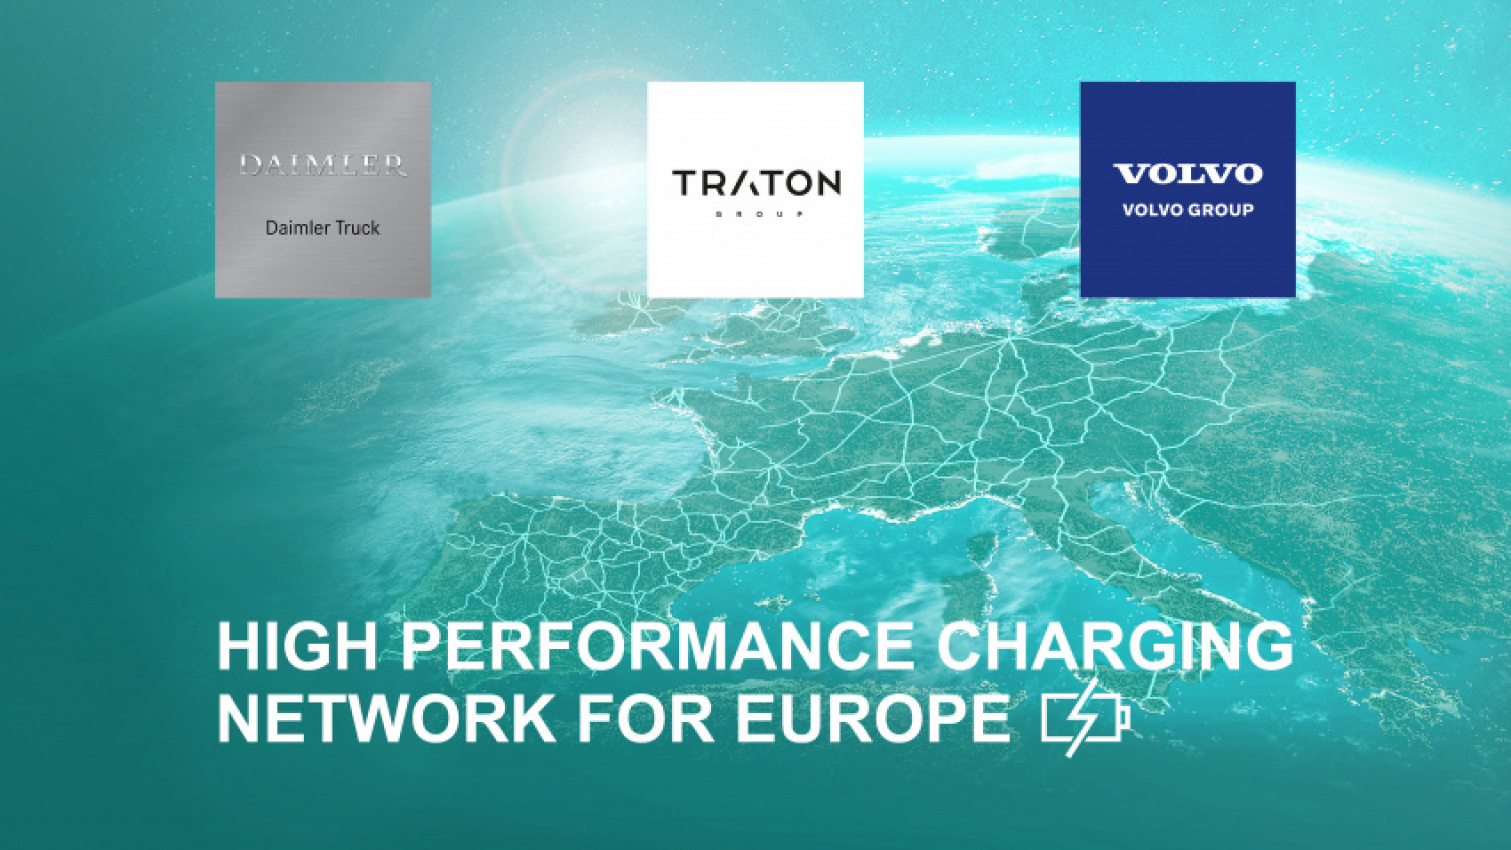 autos, cars, commercial vehicles, volvo, daimler truck, martin daum, martin lundstedt, traton group, volvo group, daimler truck, traton & volvo group plan european ev charging network for heavy-duty trucks